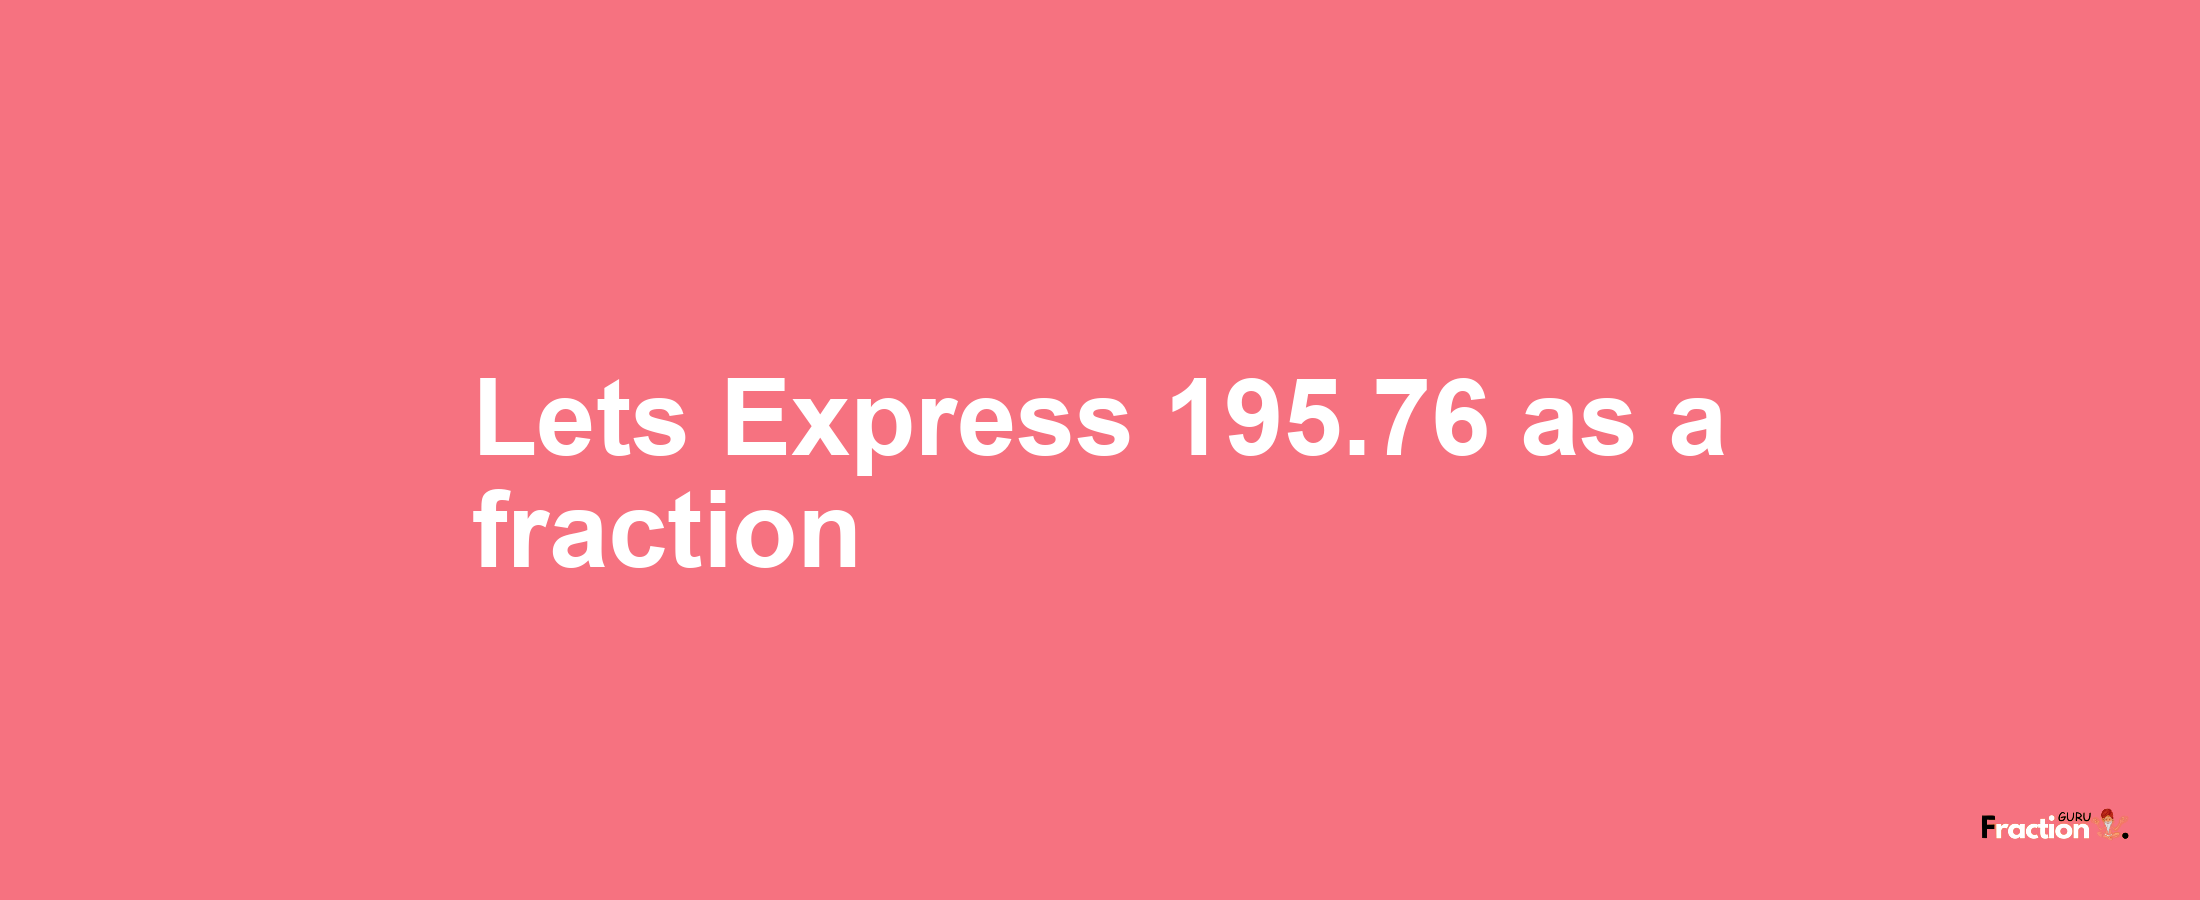 Lets Express 195.76 as afraction